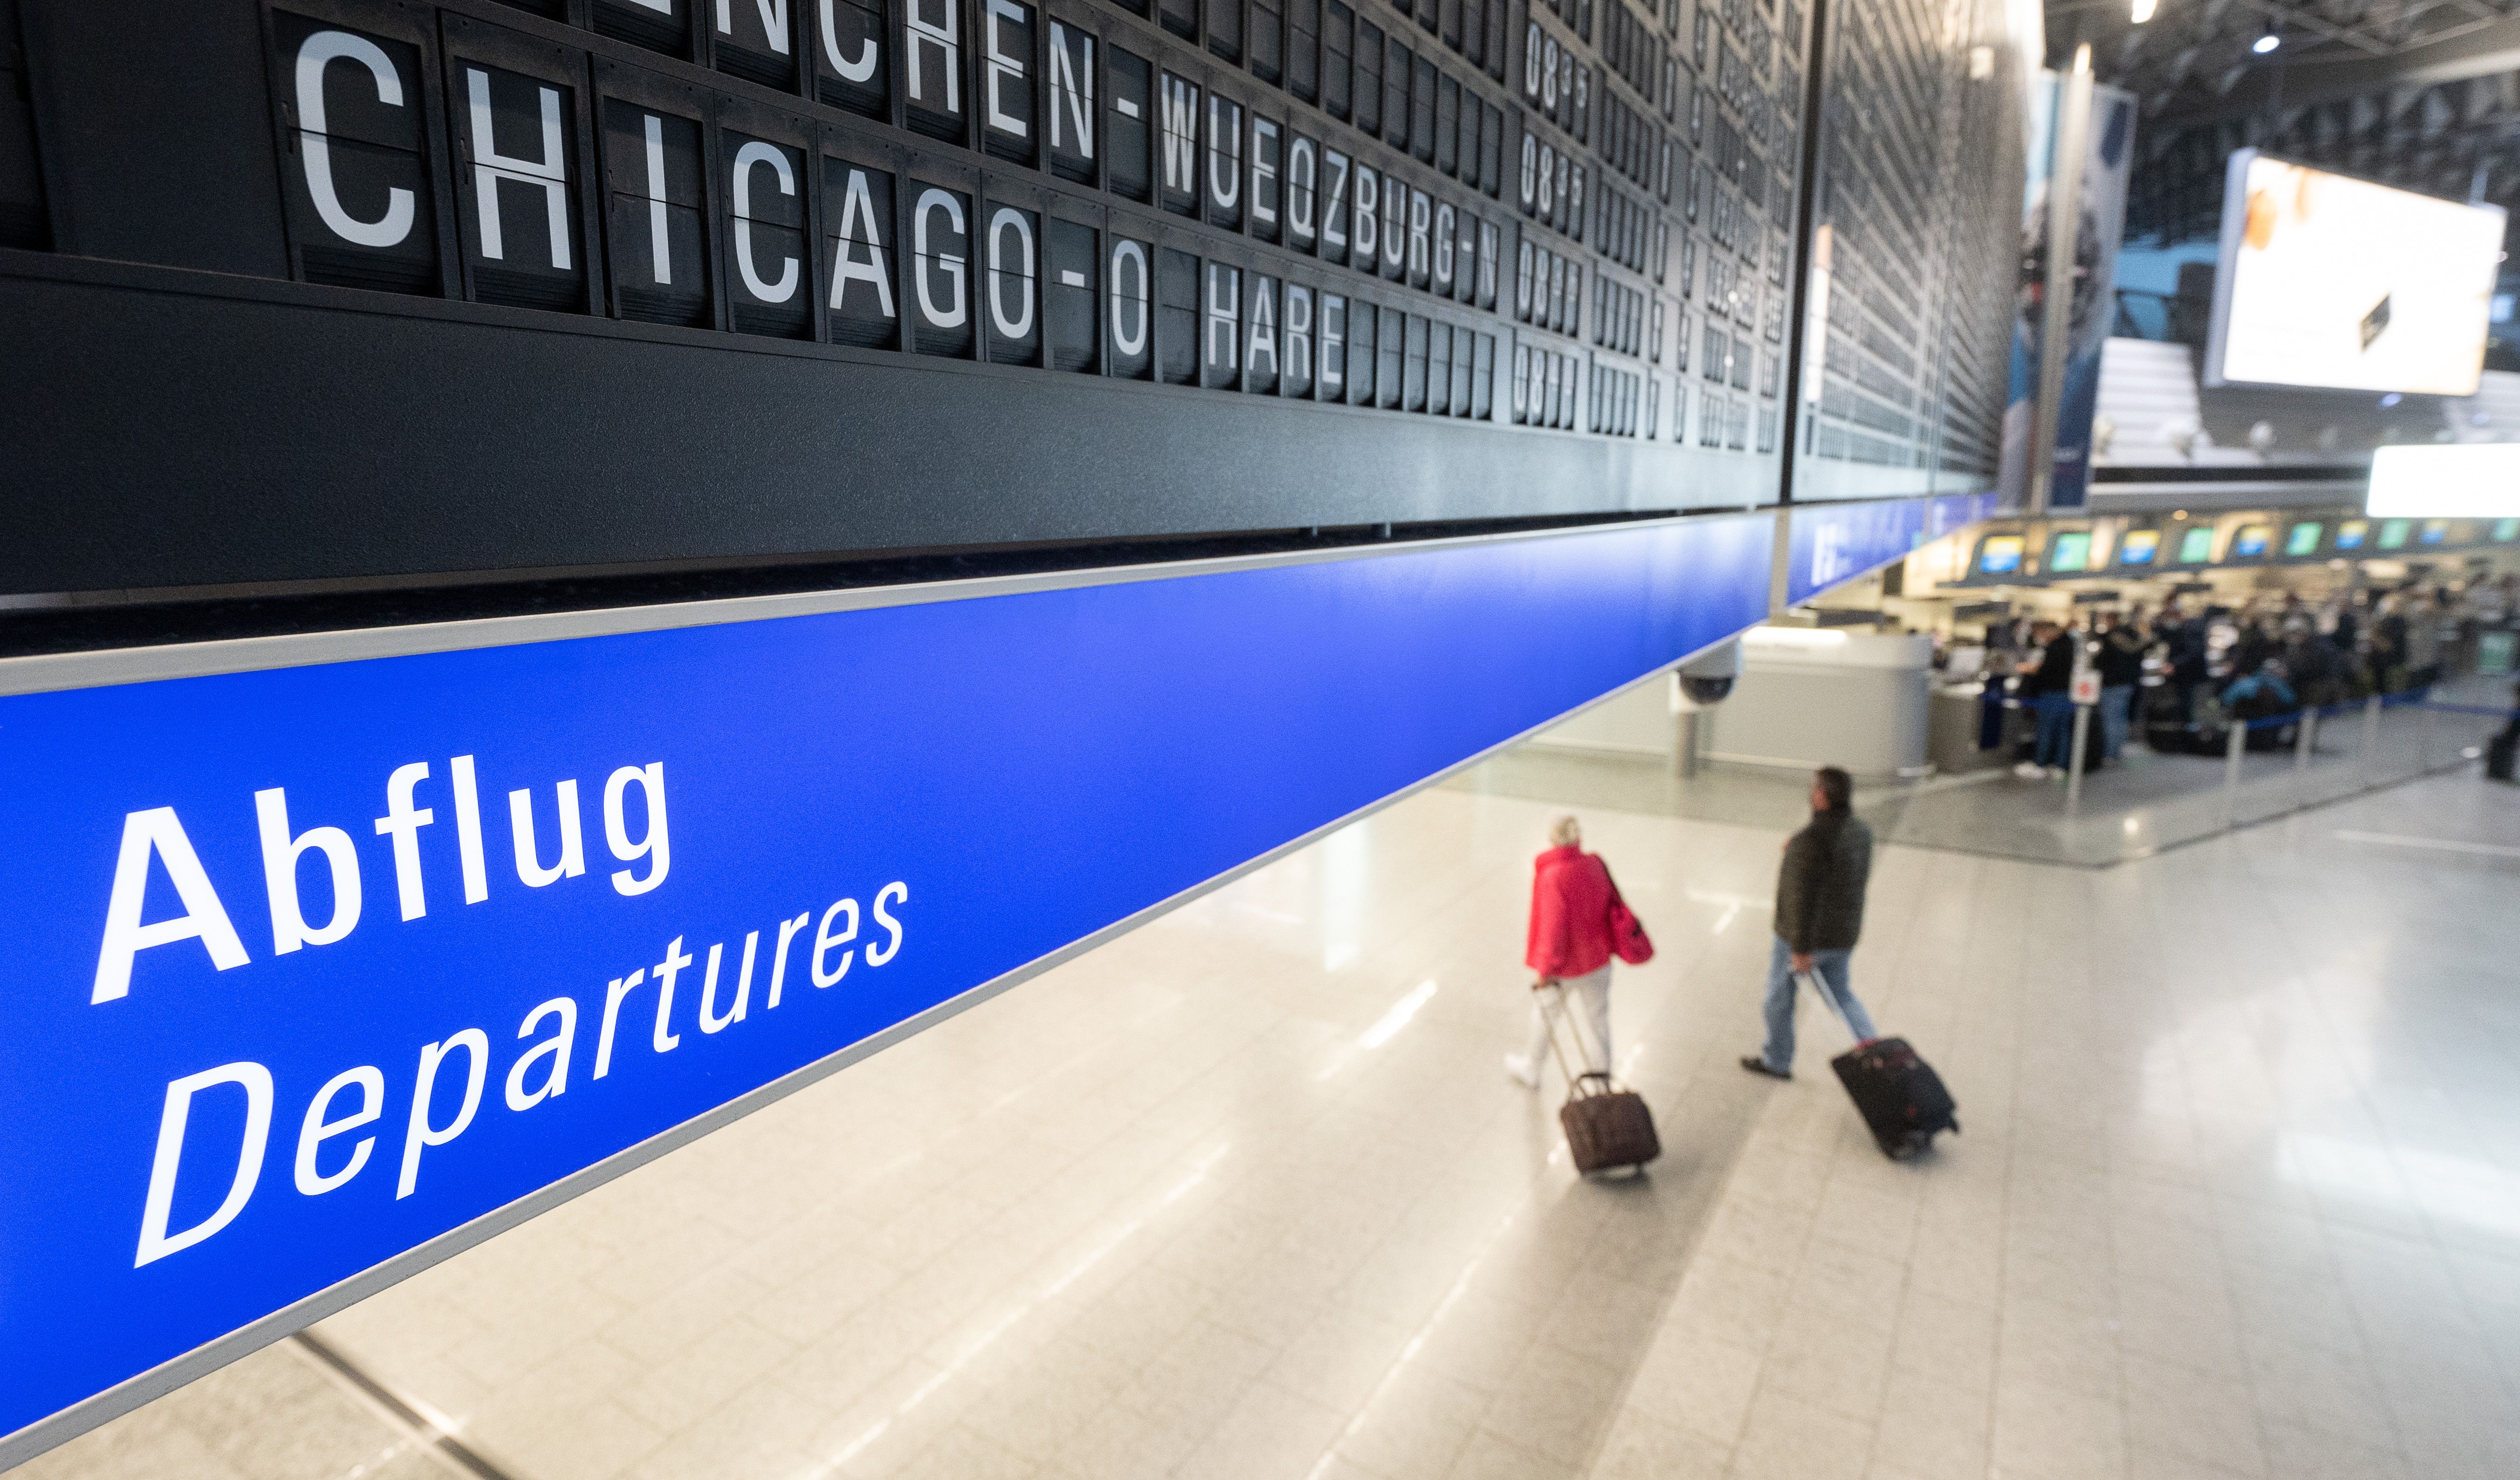  A flight to Chicago O'Hare in the U.S. is displayed on a board at Frankfurt airport under which passengers with suitcases walk along. 